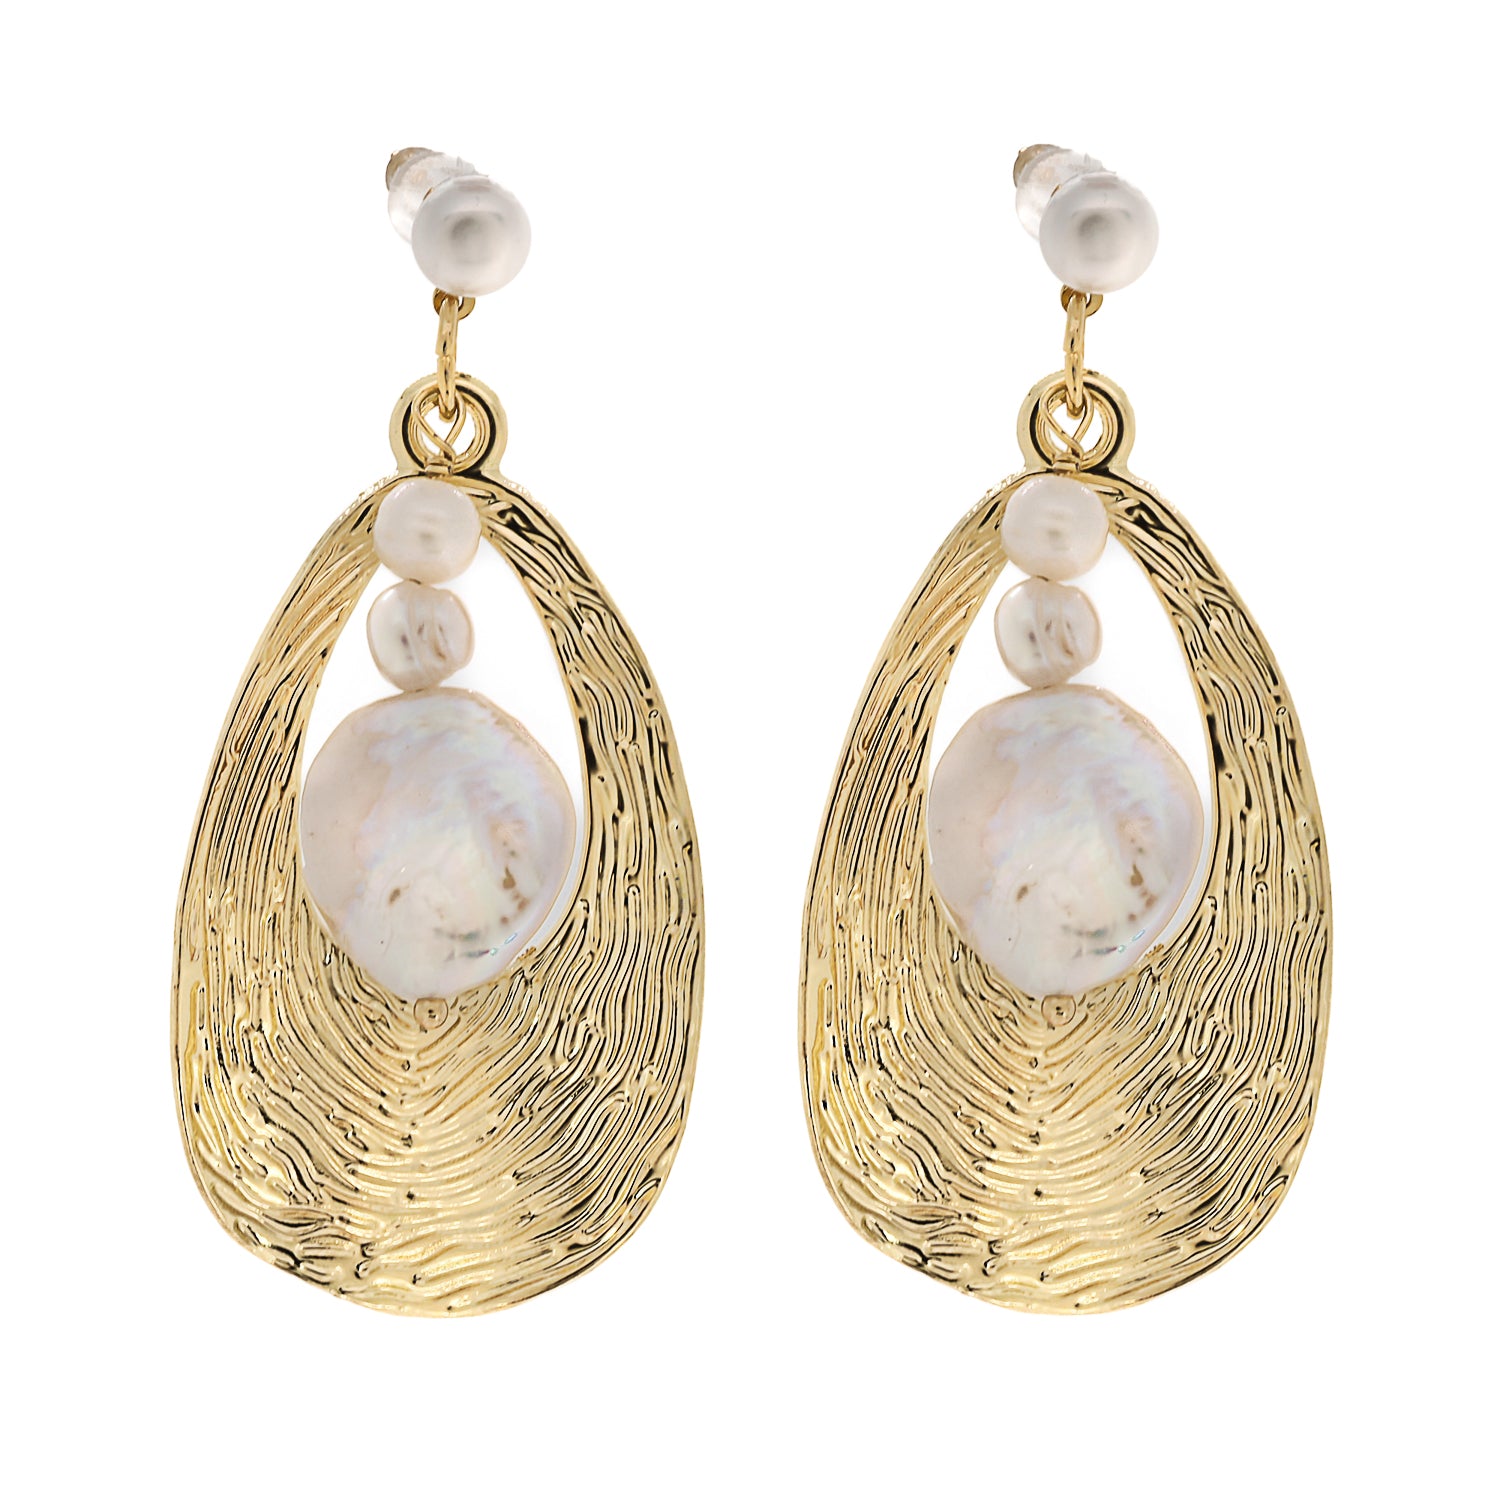 Cleopatra Gold &amp; Pearl Earrings: Bohemian Chic, Handmade in the USA.